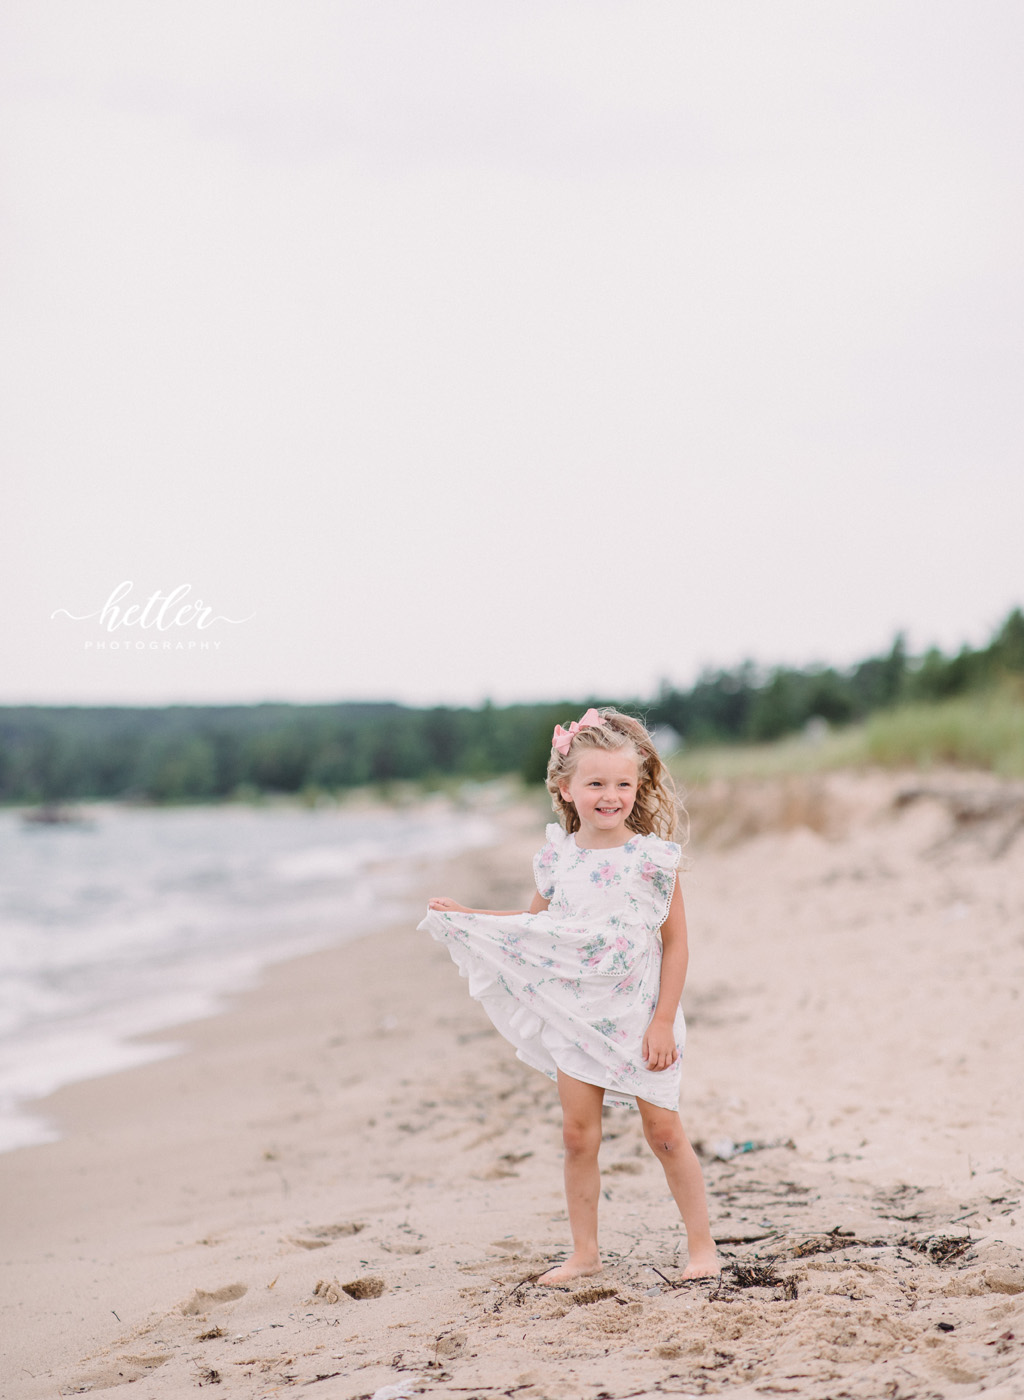 Petoskey family beach photos with Shelby from The Day's Design